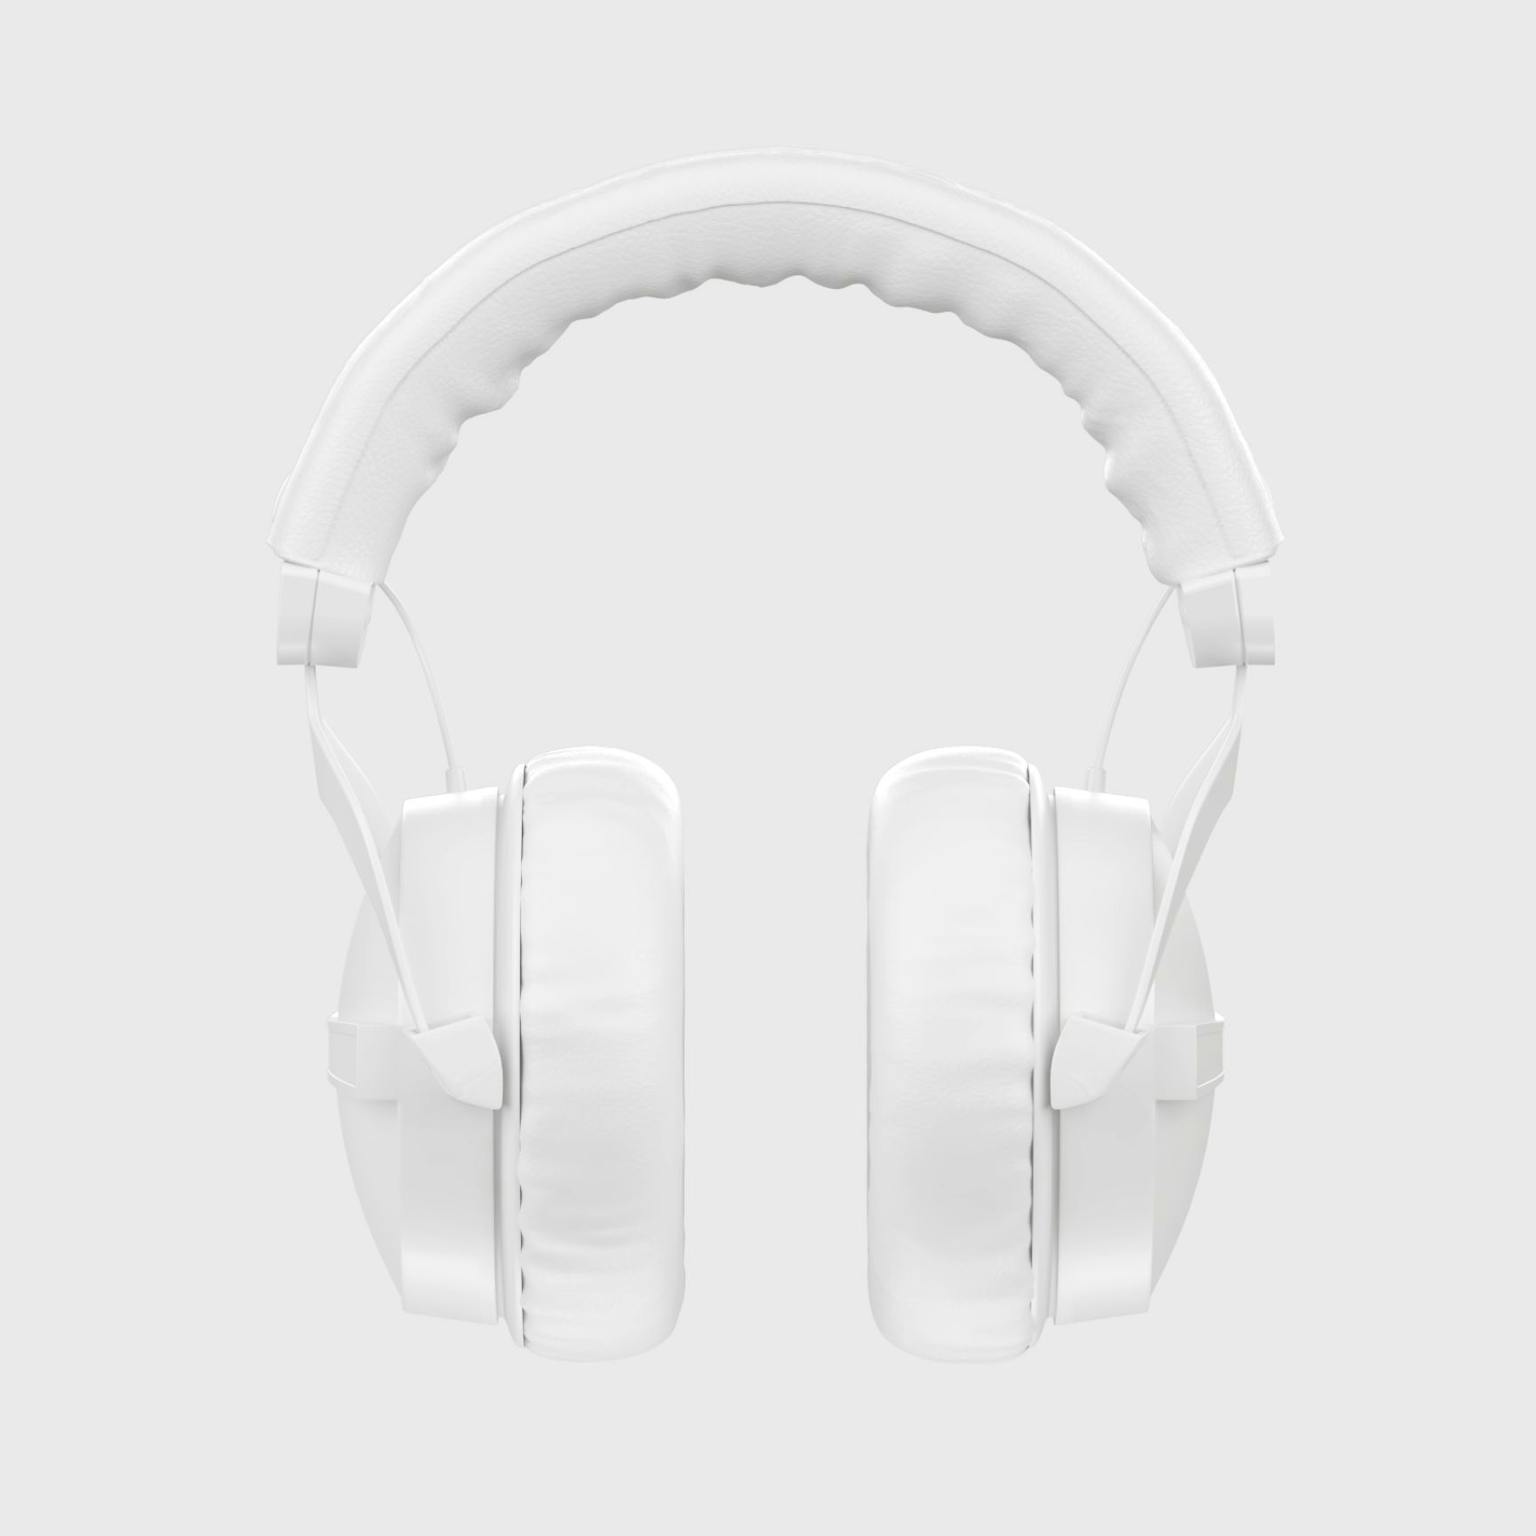 A pair of white over-ear headphones